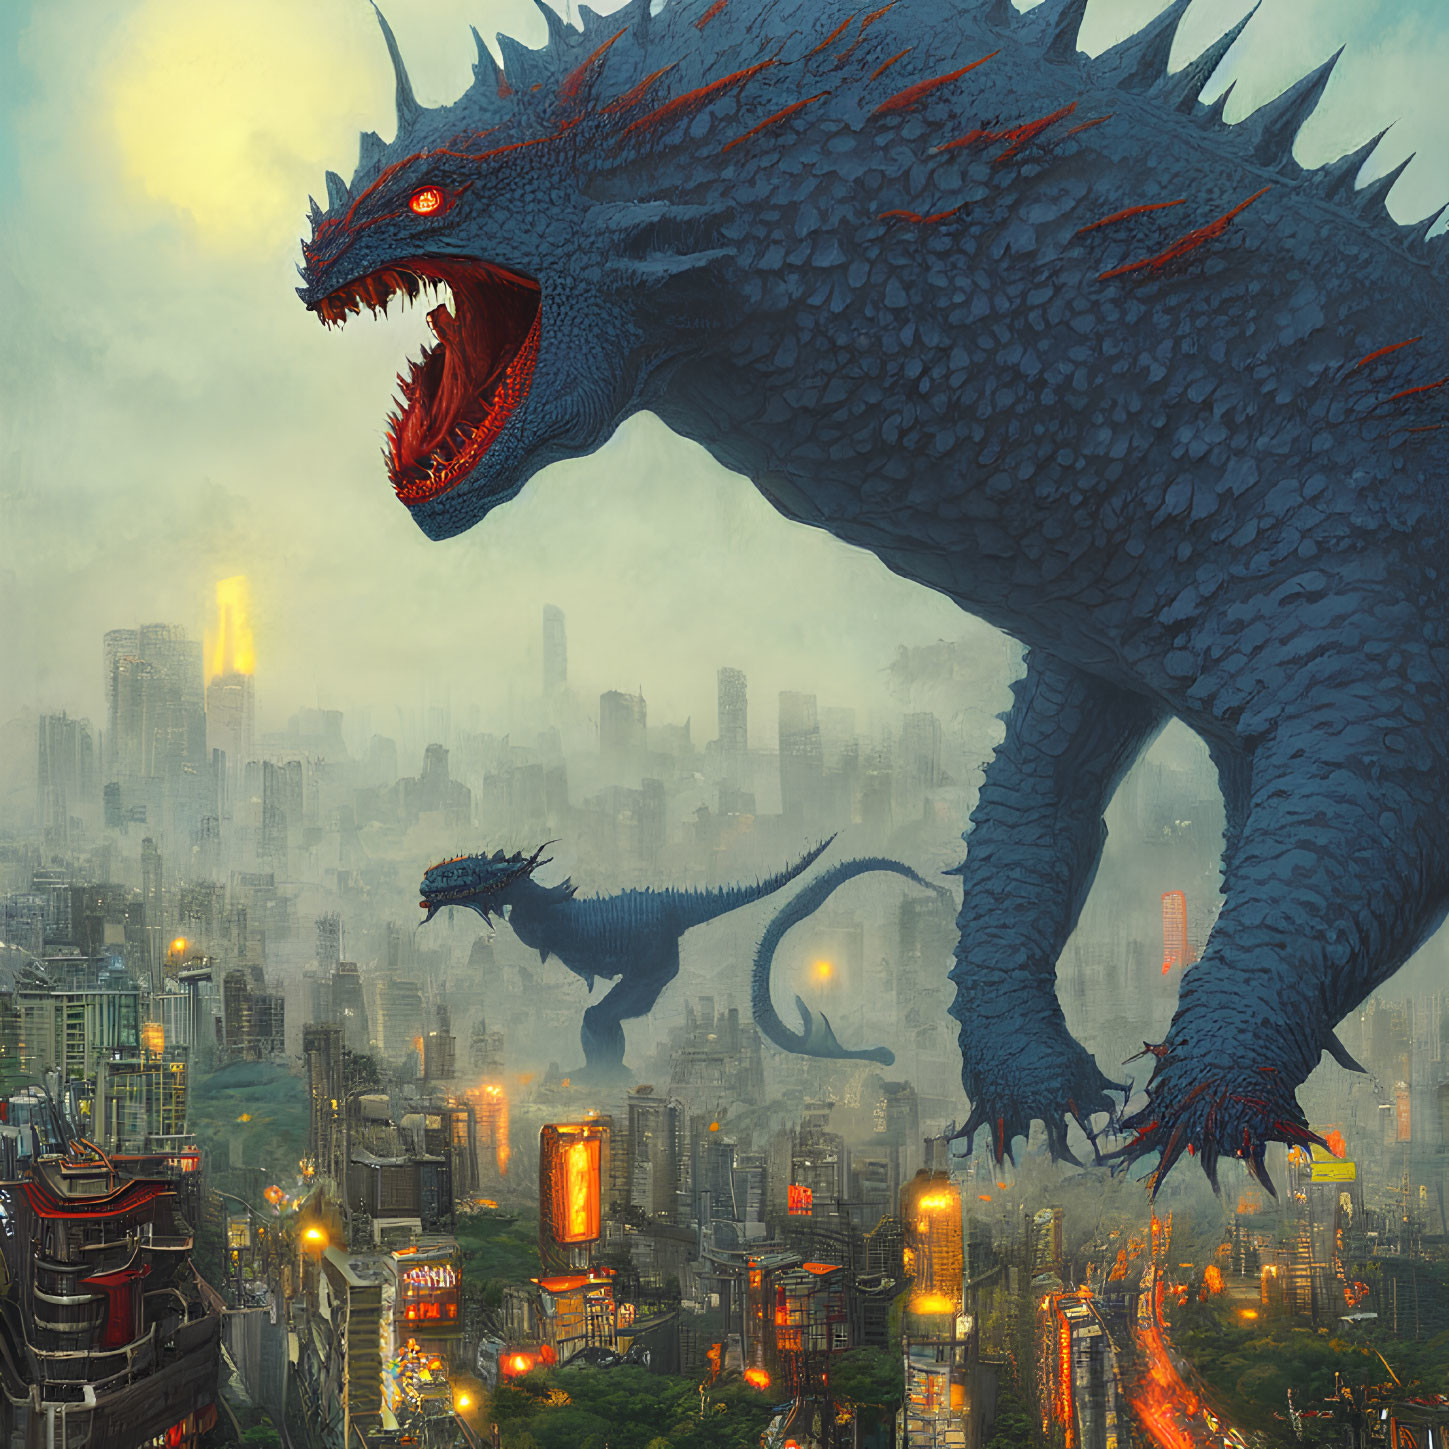 Gigantic blue dragon roaring over futuristic cityscape with another dragon in background